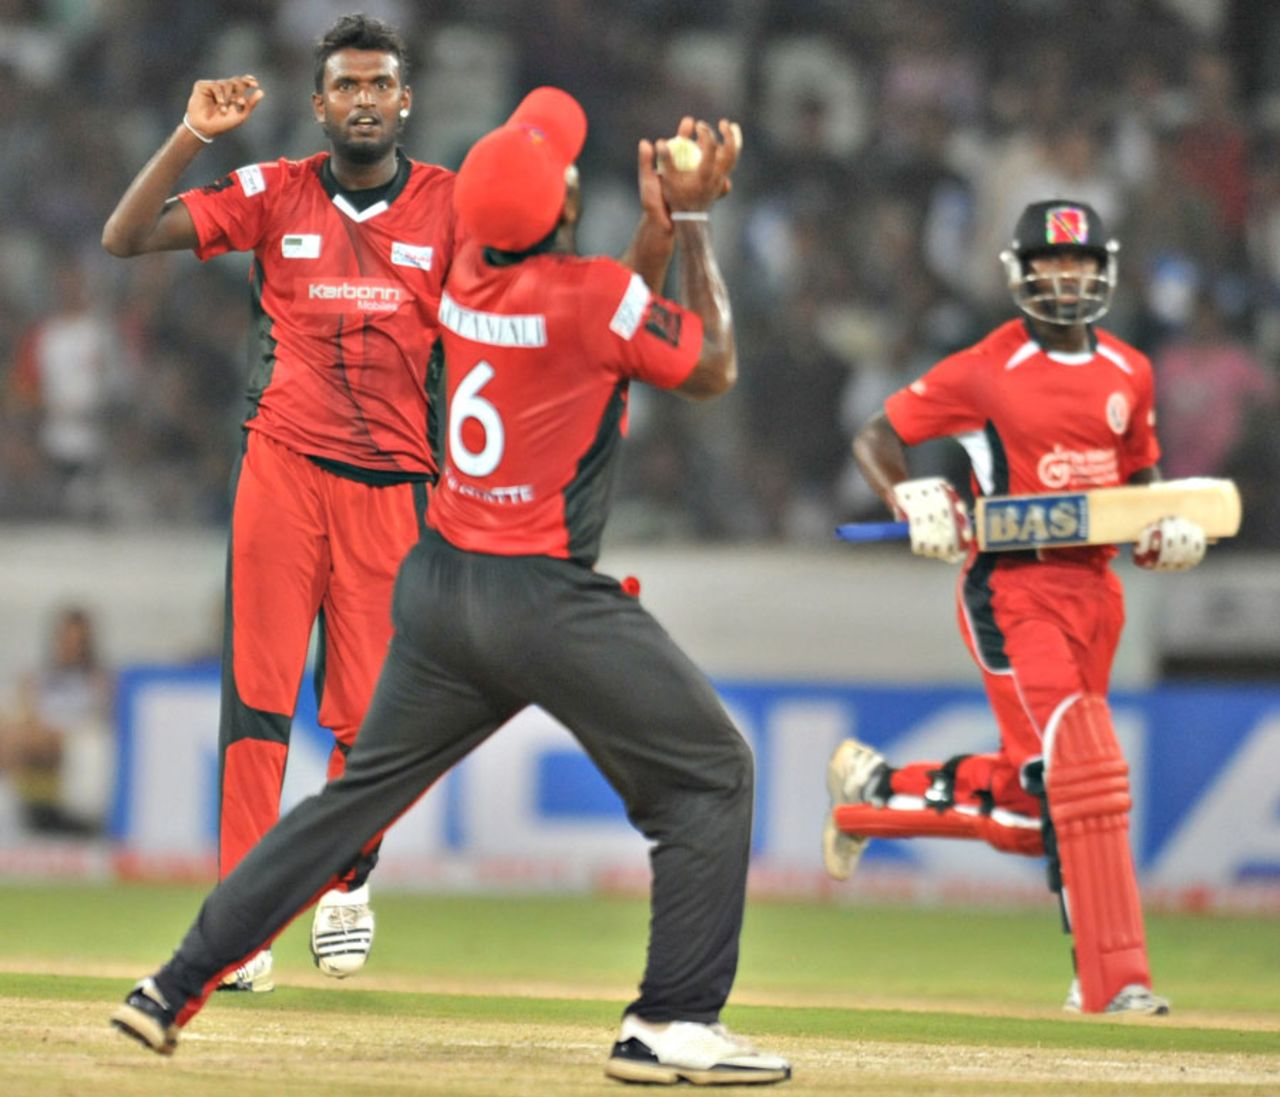 Arosh Janoda looks on as Mahela Udawatte holds a catch, Ruhuna v T&T, CLT20 qualifier, Hyderabad, September 19, 2011